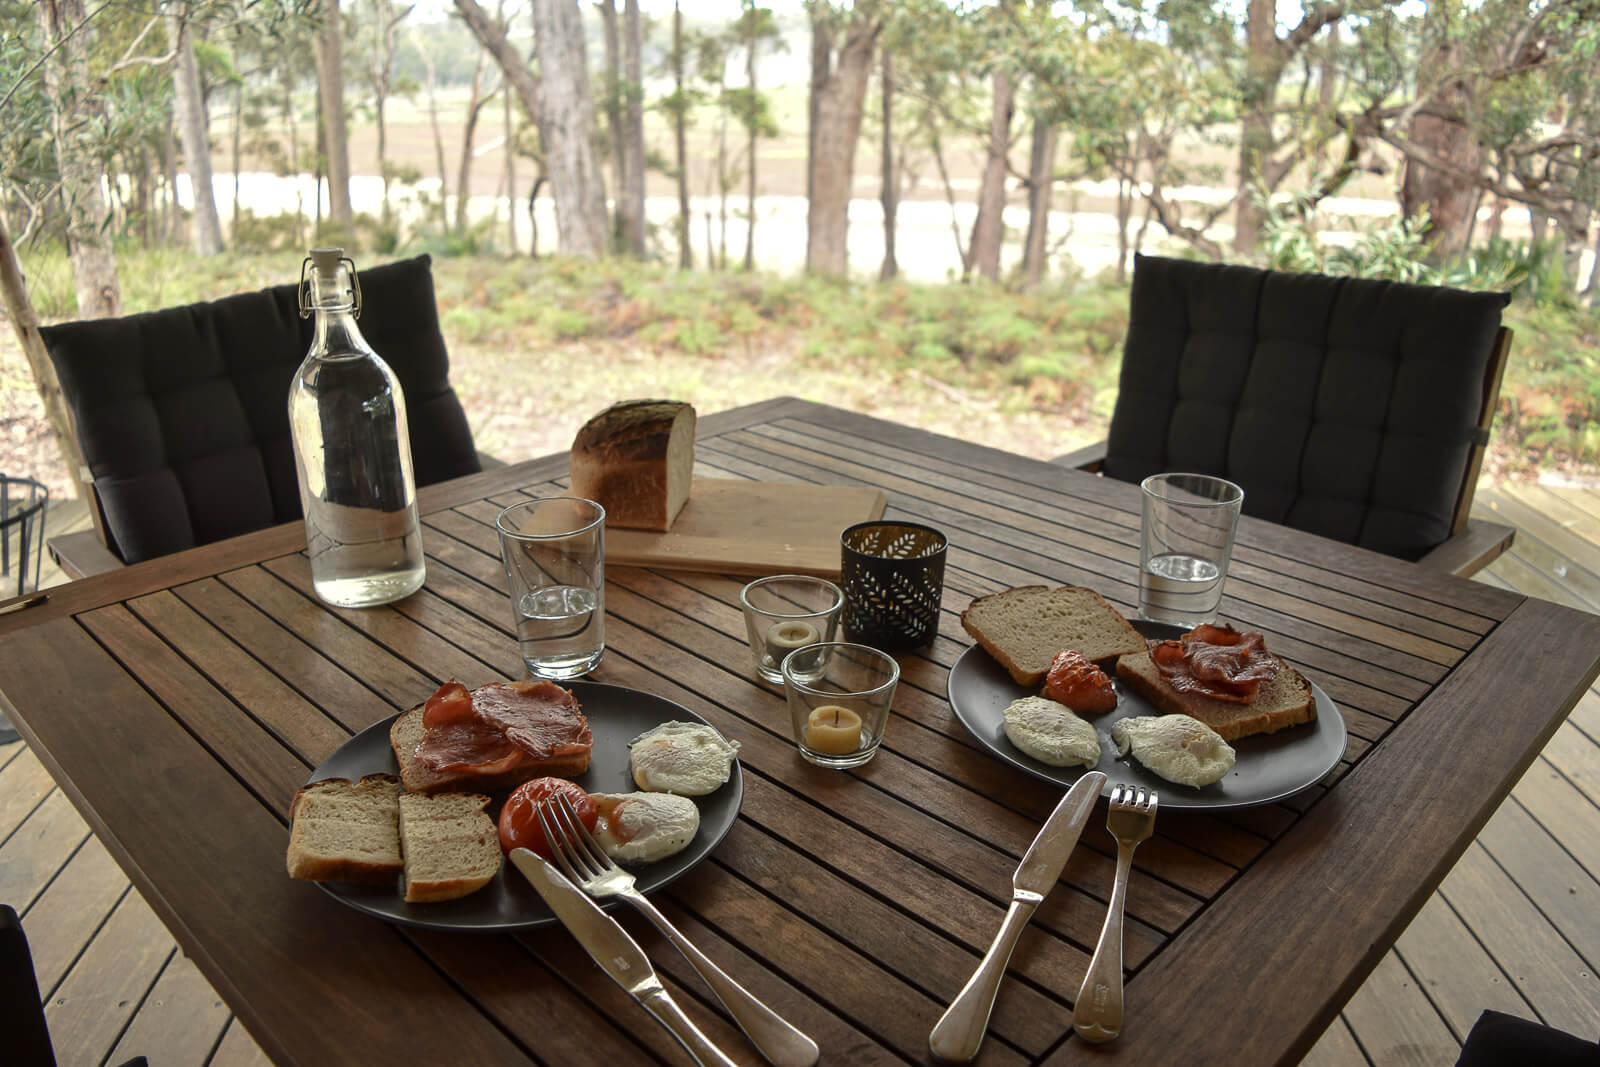 A table with plates of eggs and bacon, overlooking a lagoon